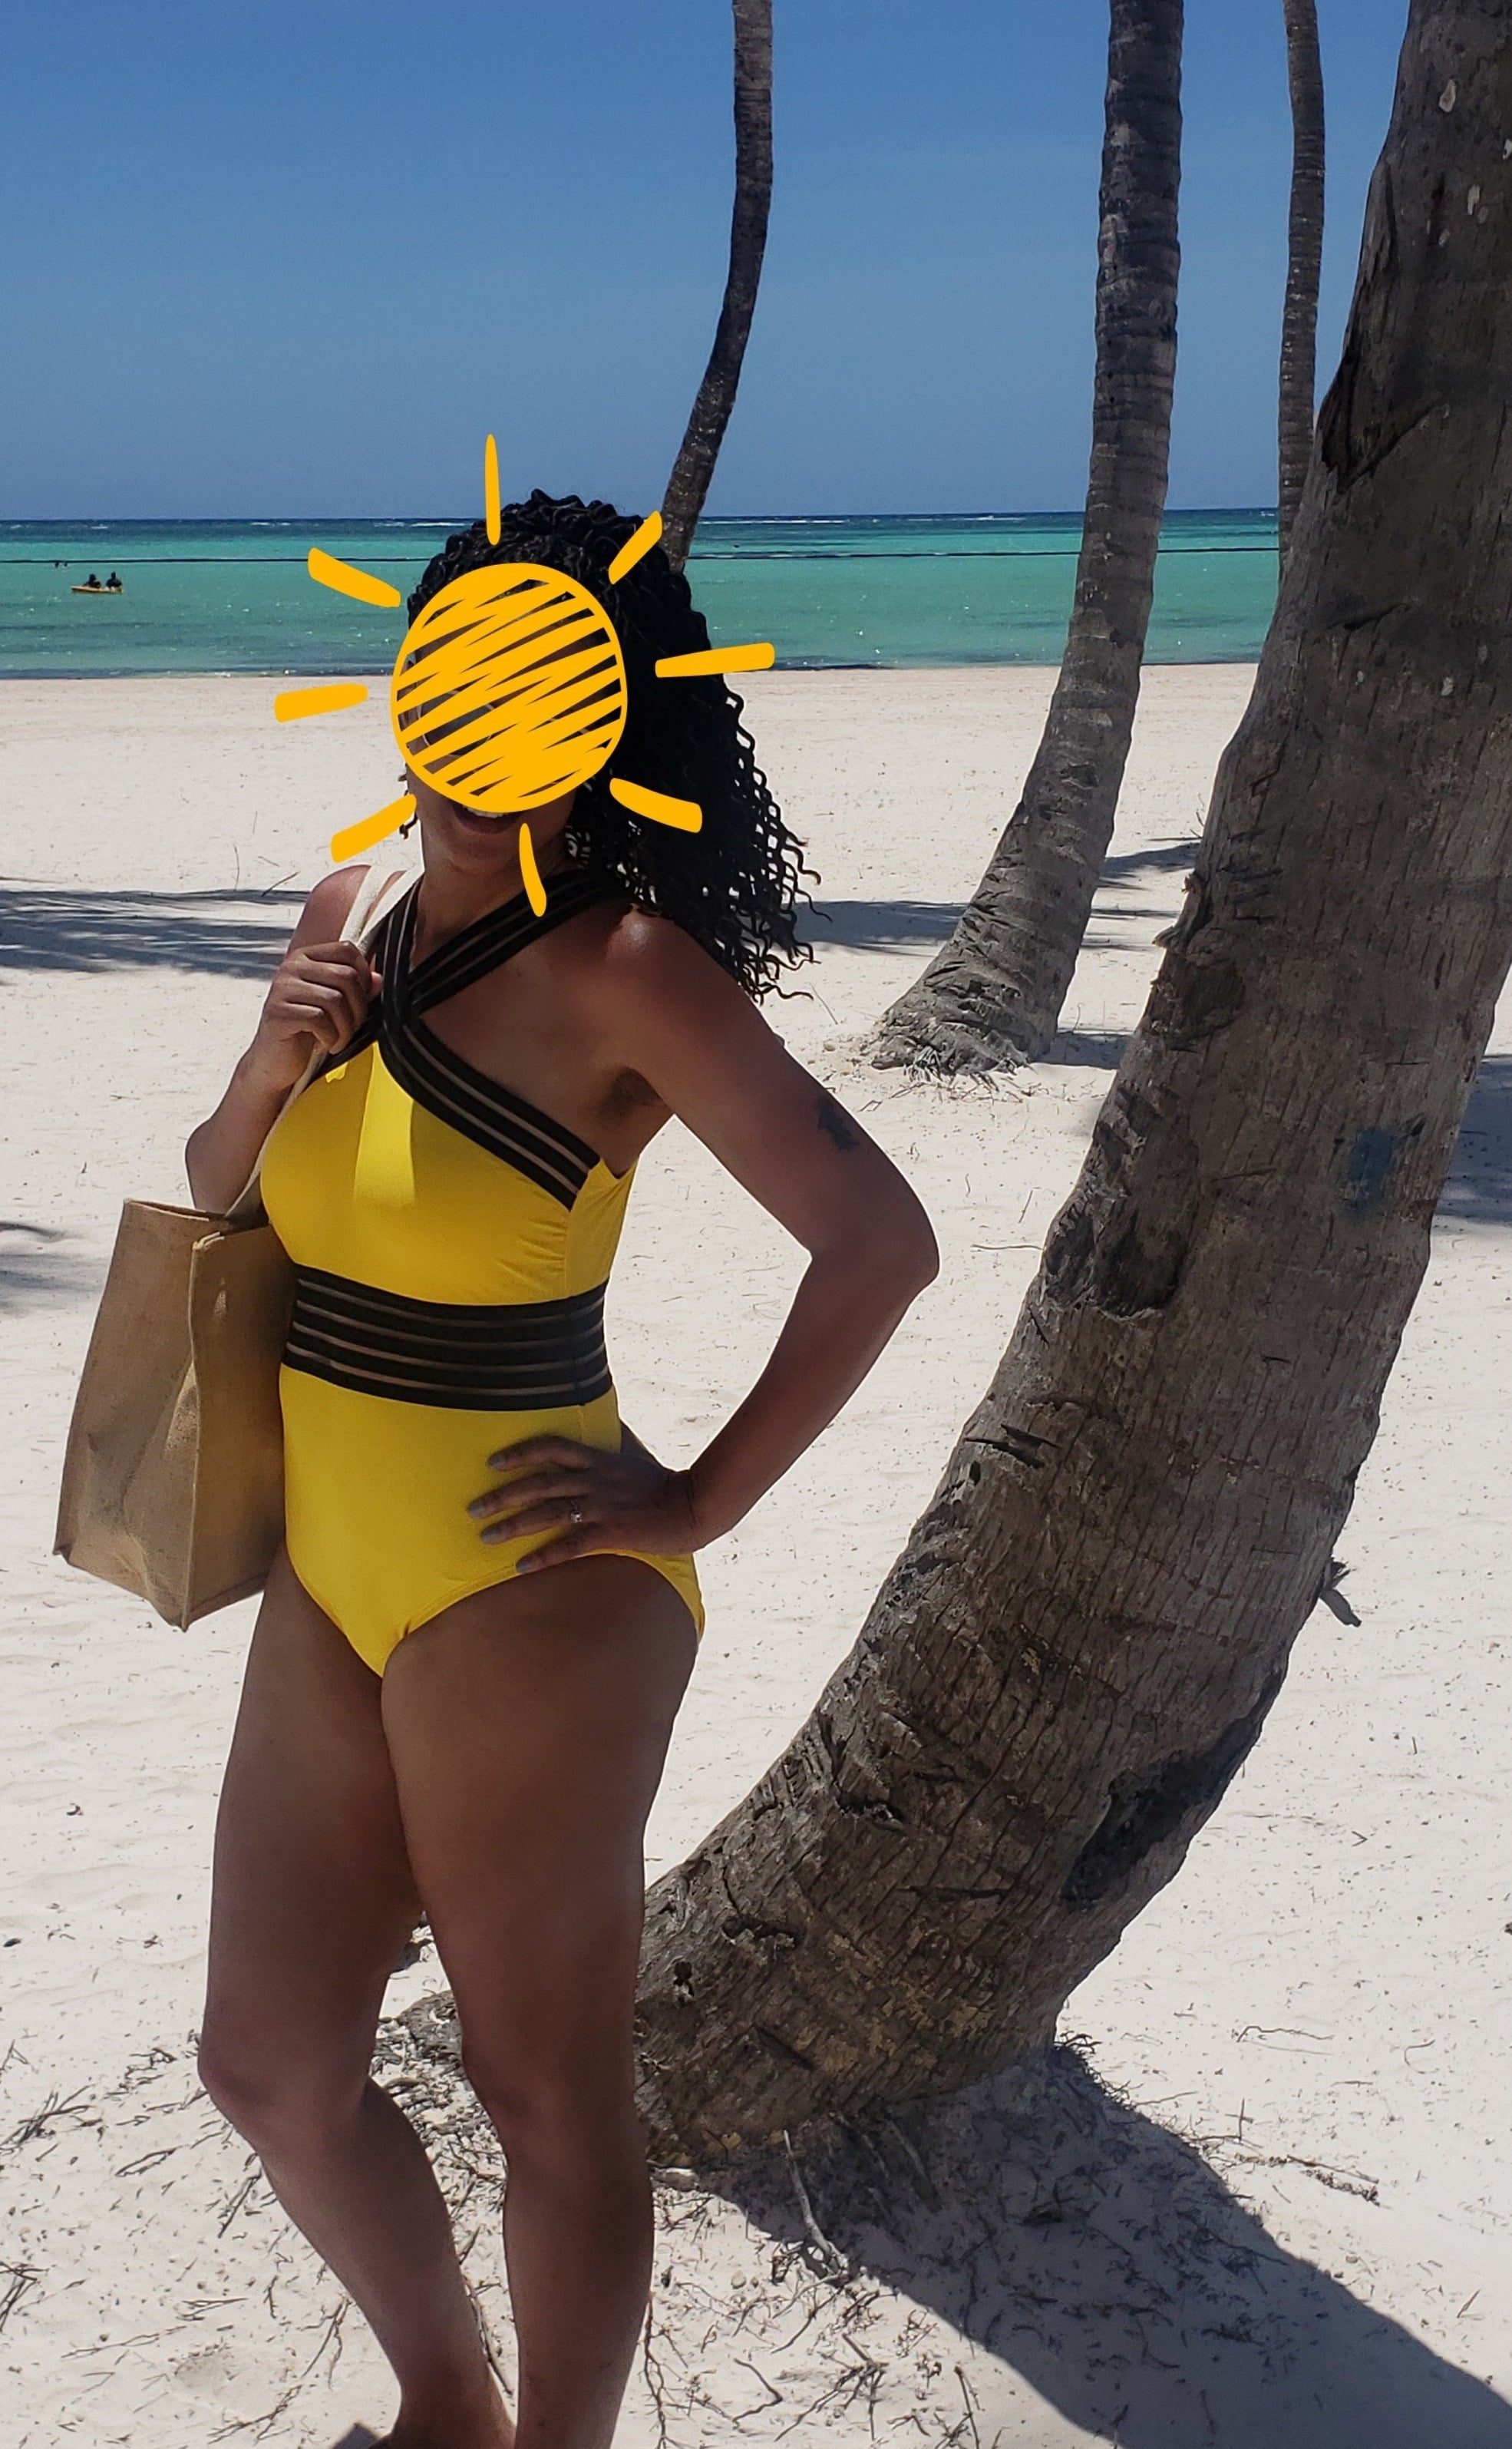 A reviewer in the black and yellow swimsuit